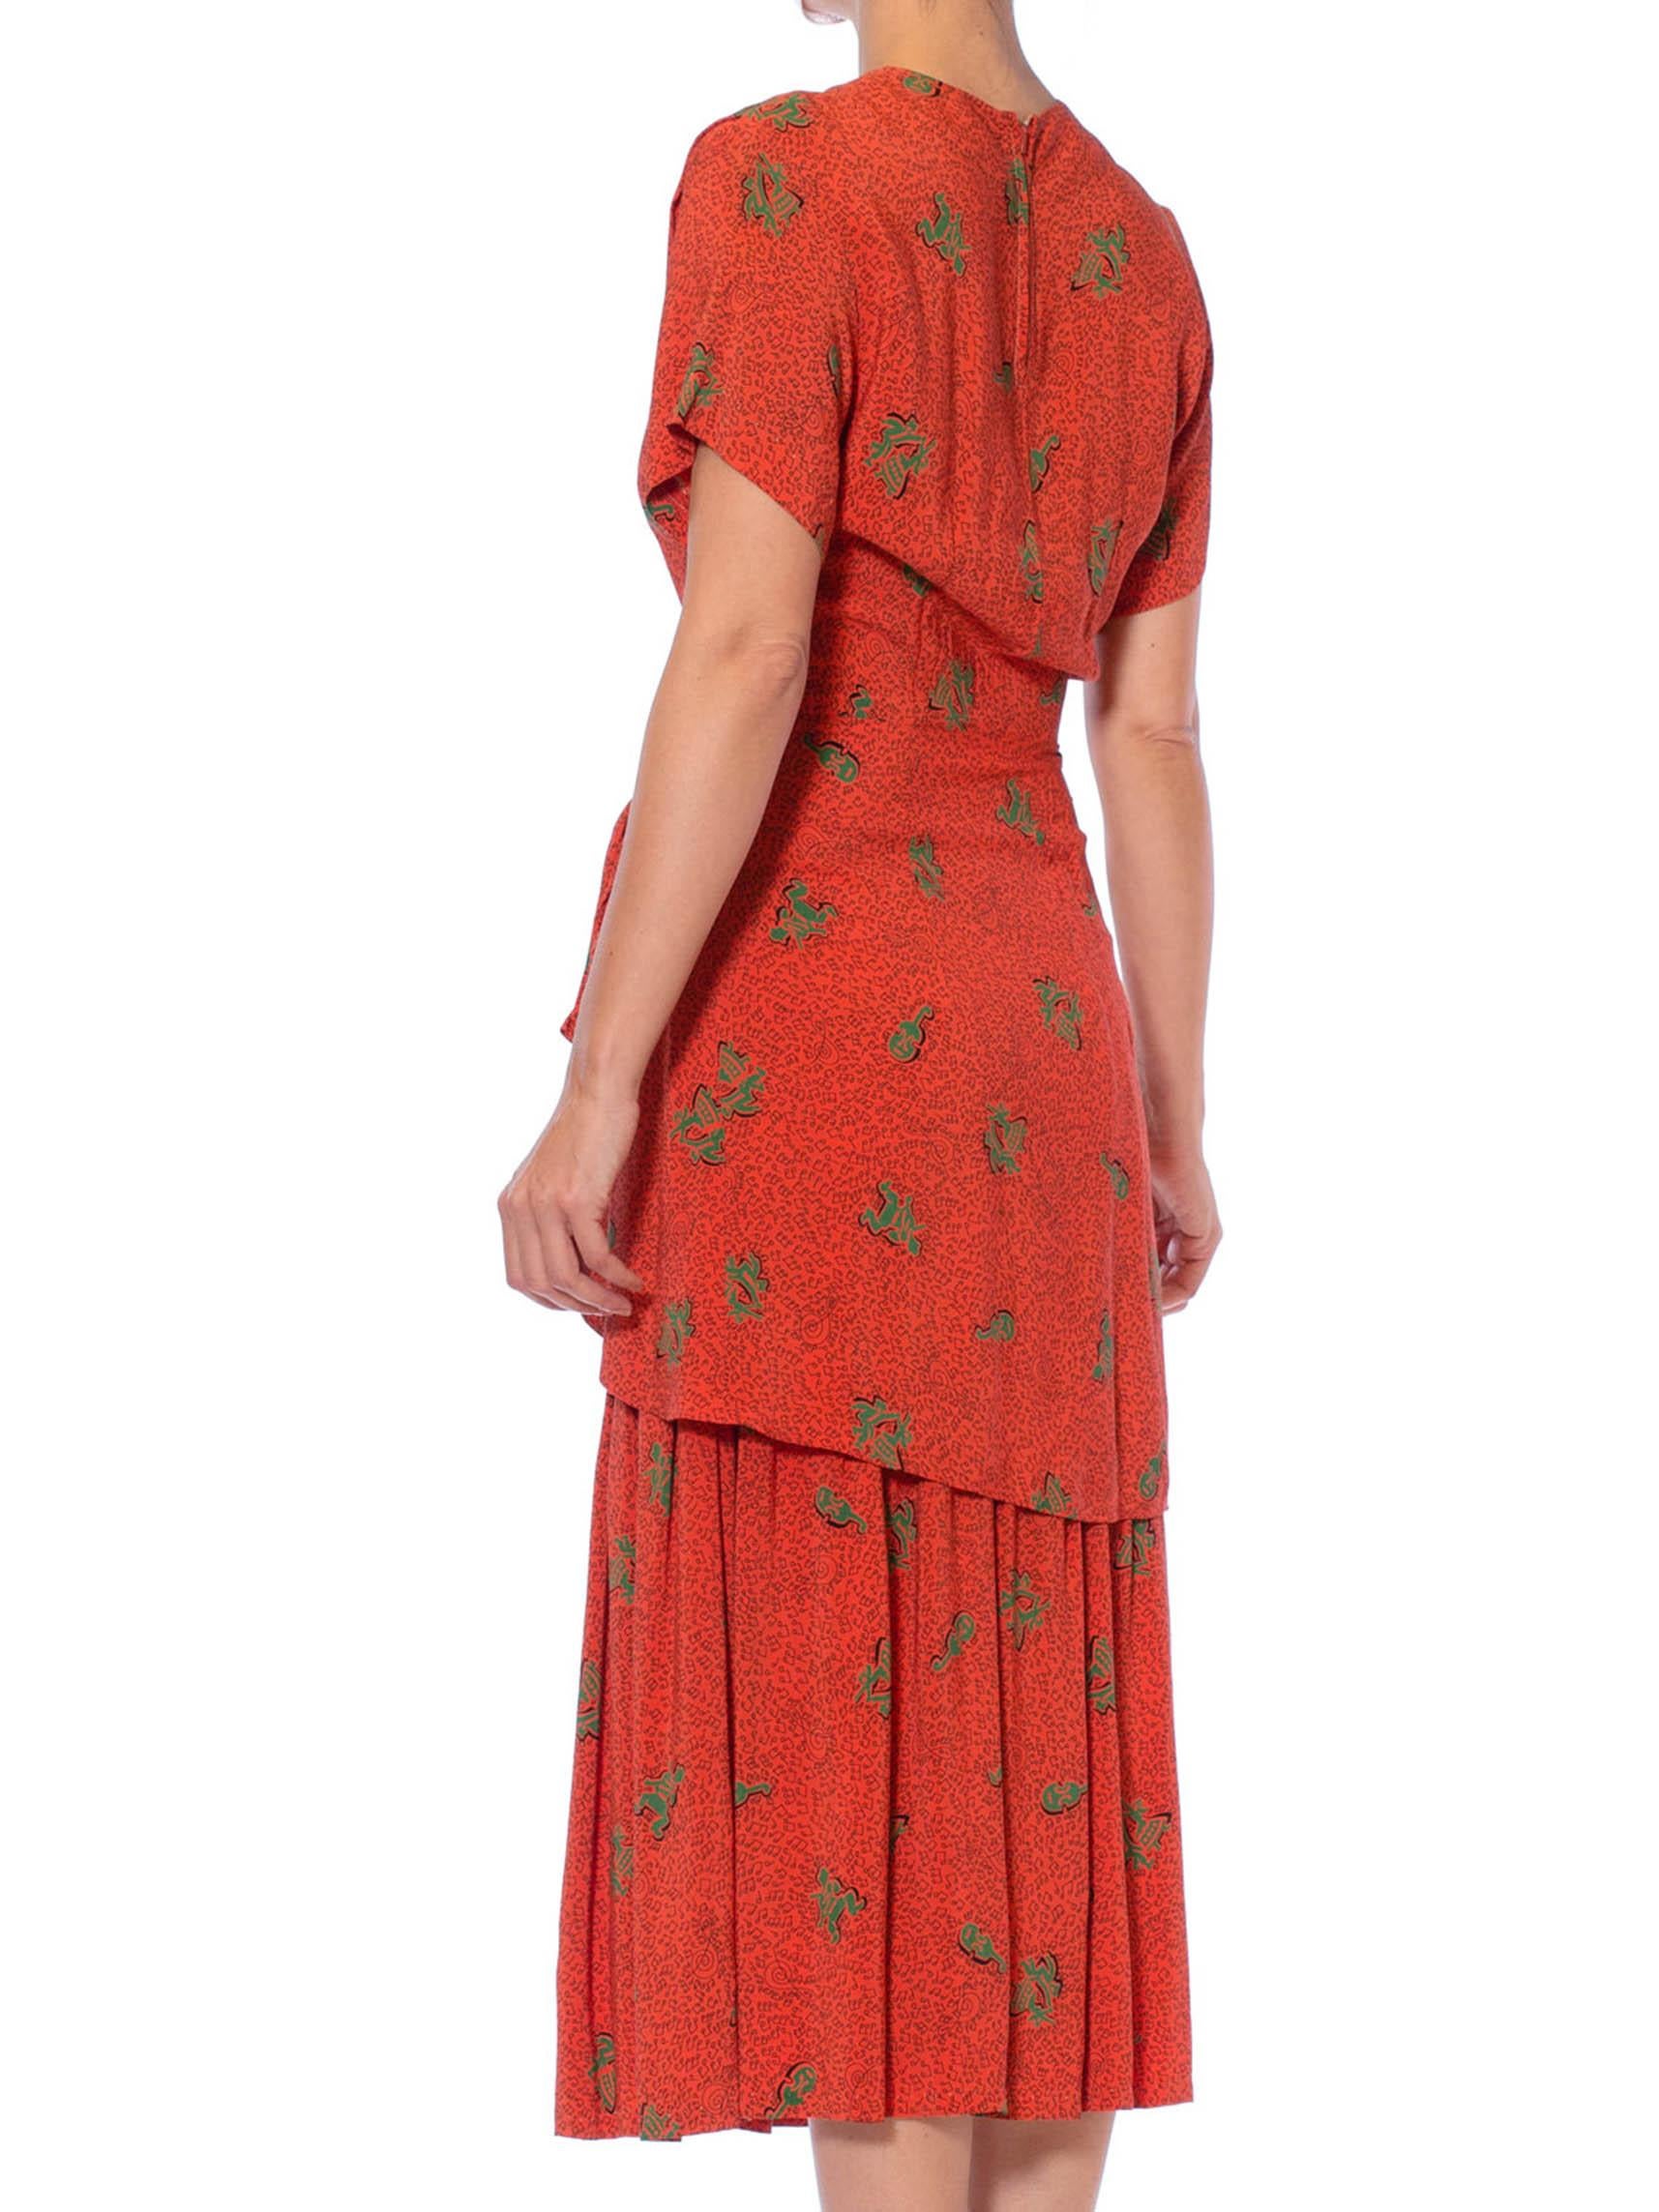 1940'S LORA LENOX Persimmon Red Rayon Crepe Rockabilly Lindy Hop Swing Dancer M For Sale 2